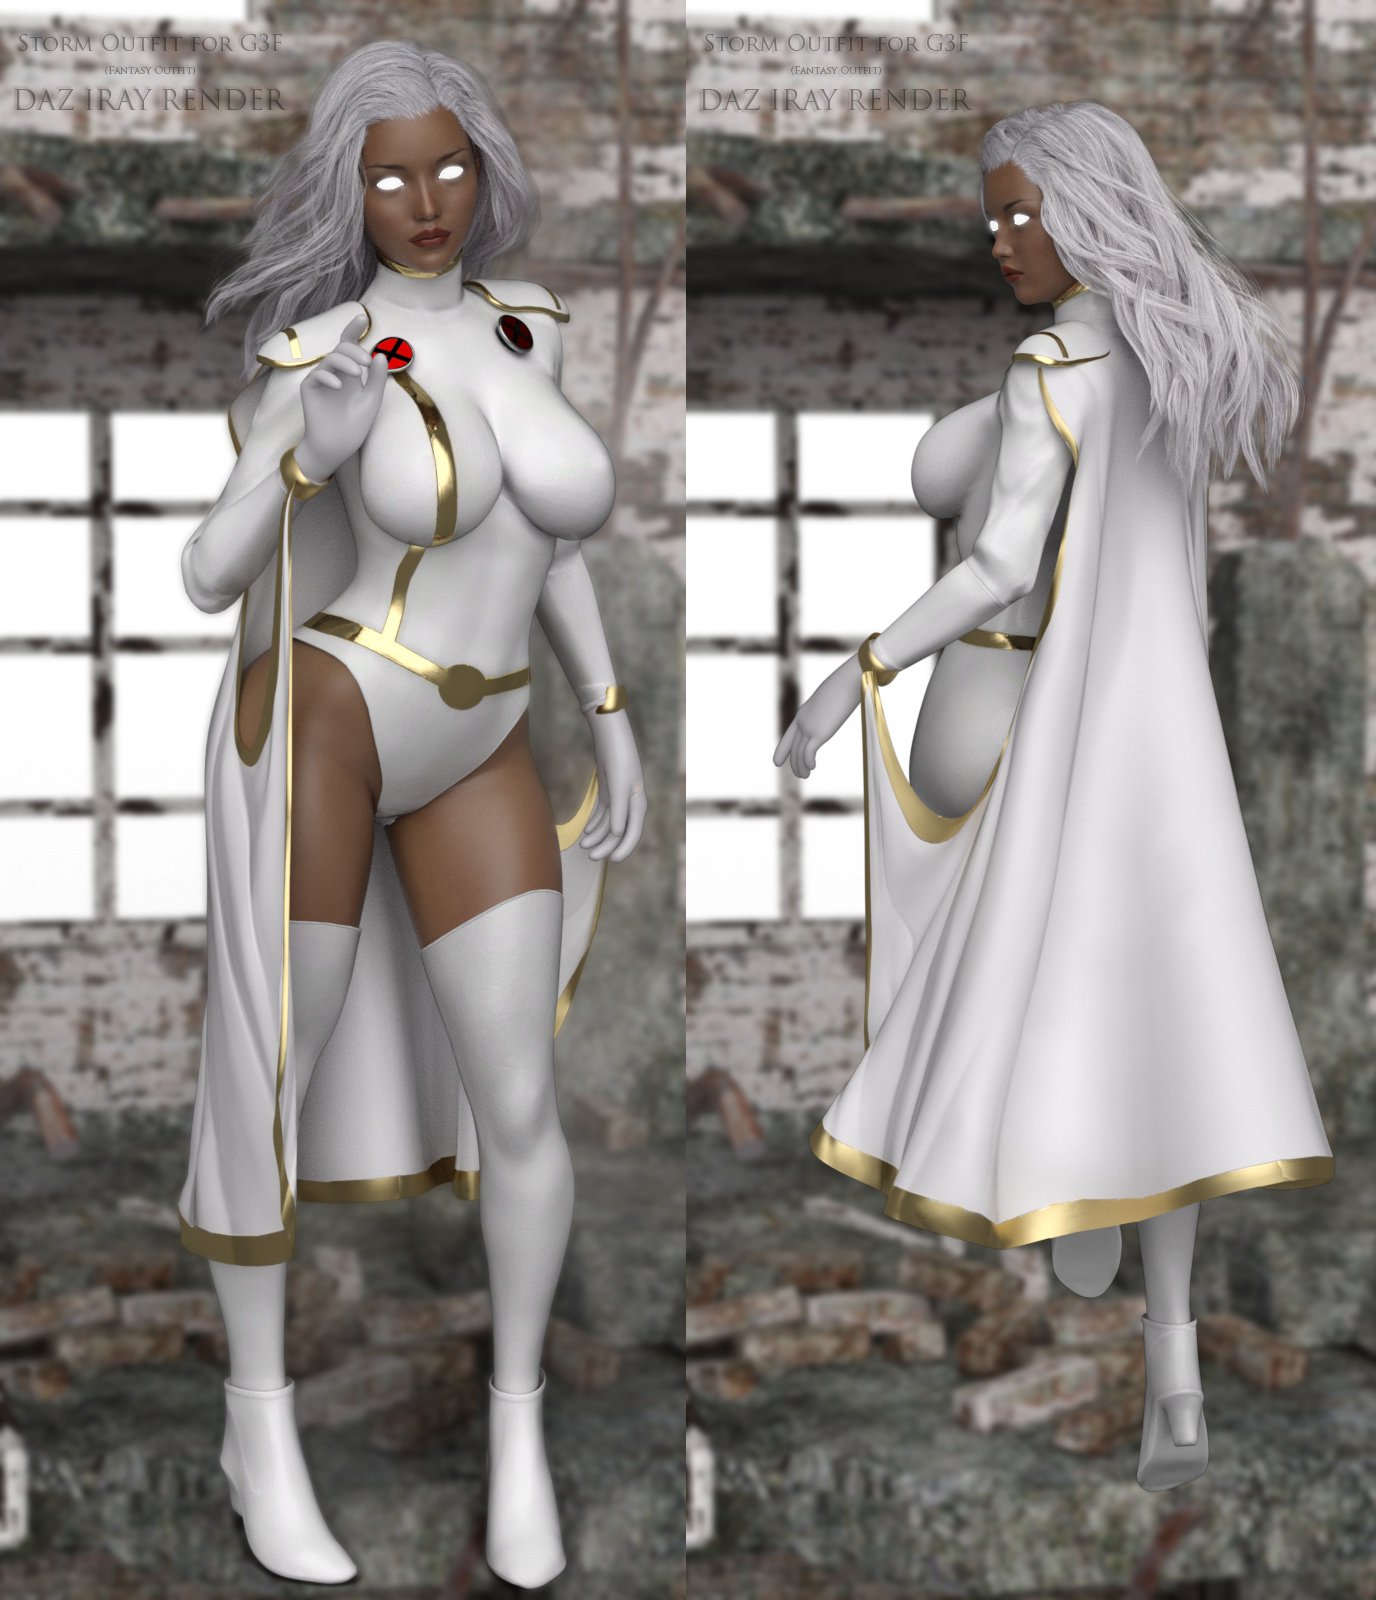 XM Storm Outfit for G3F_DAZ3D下载站